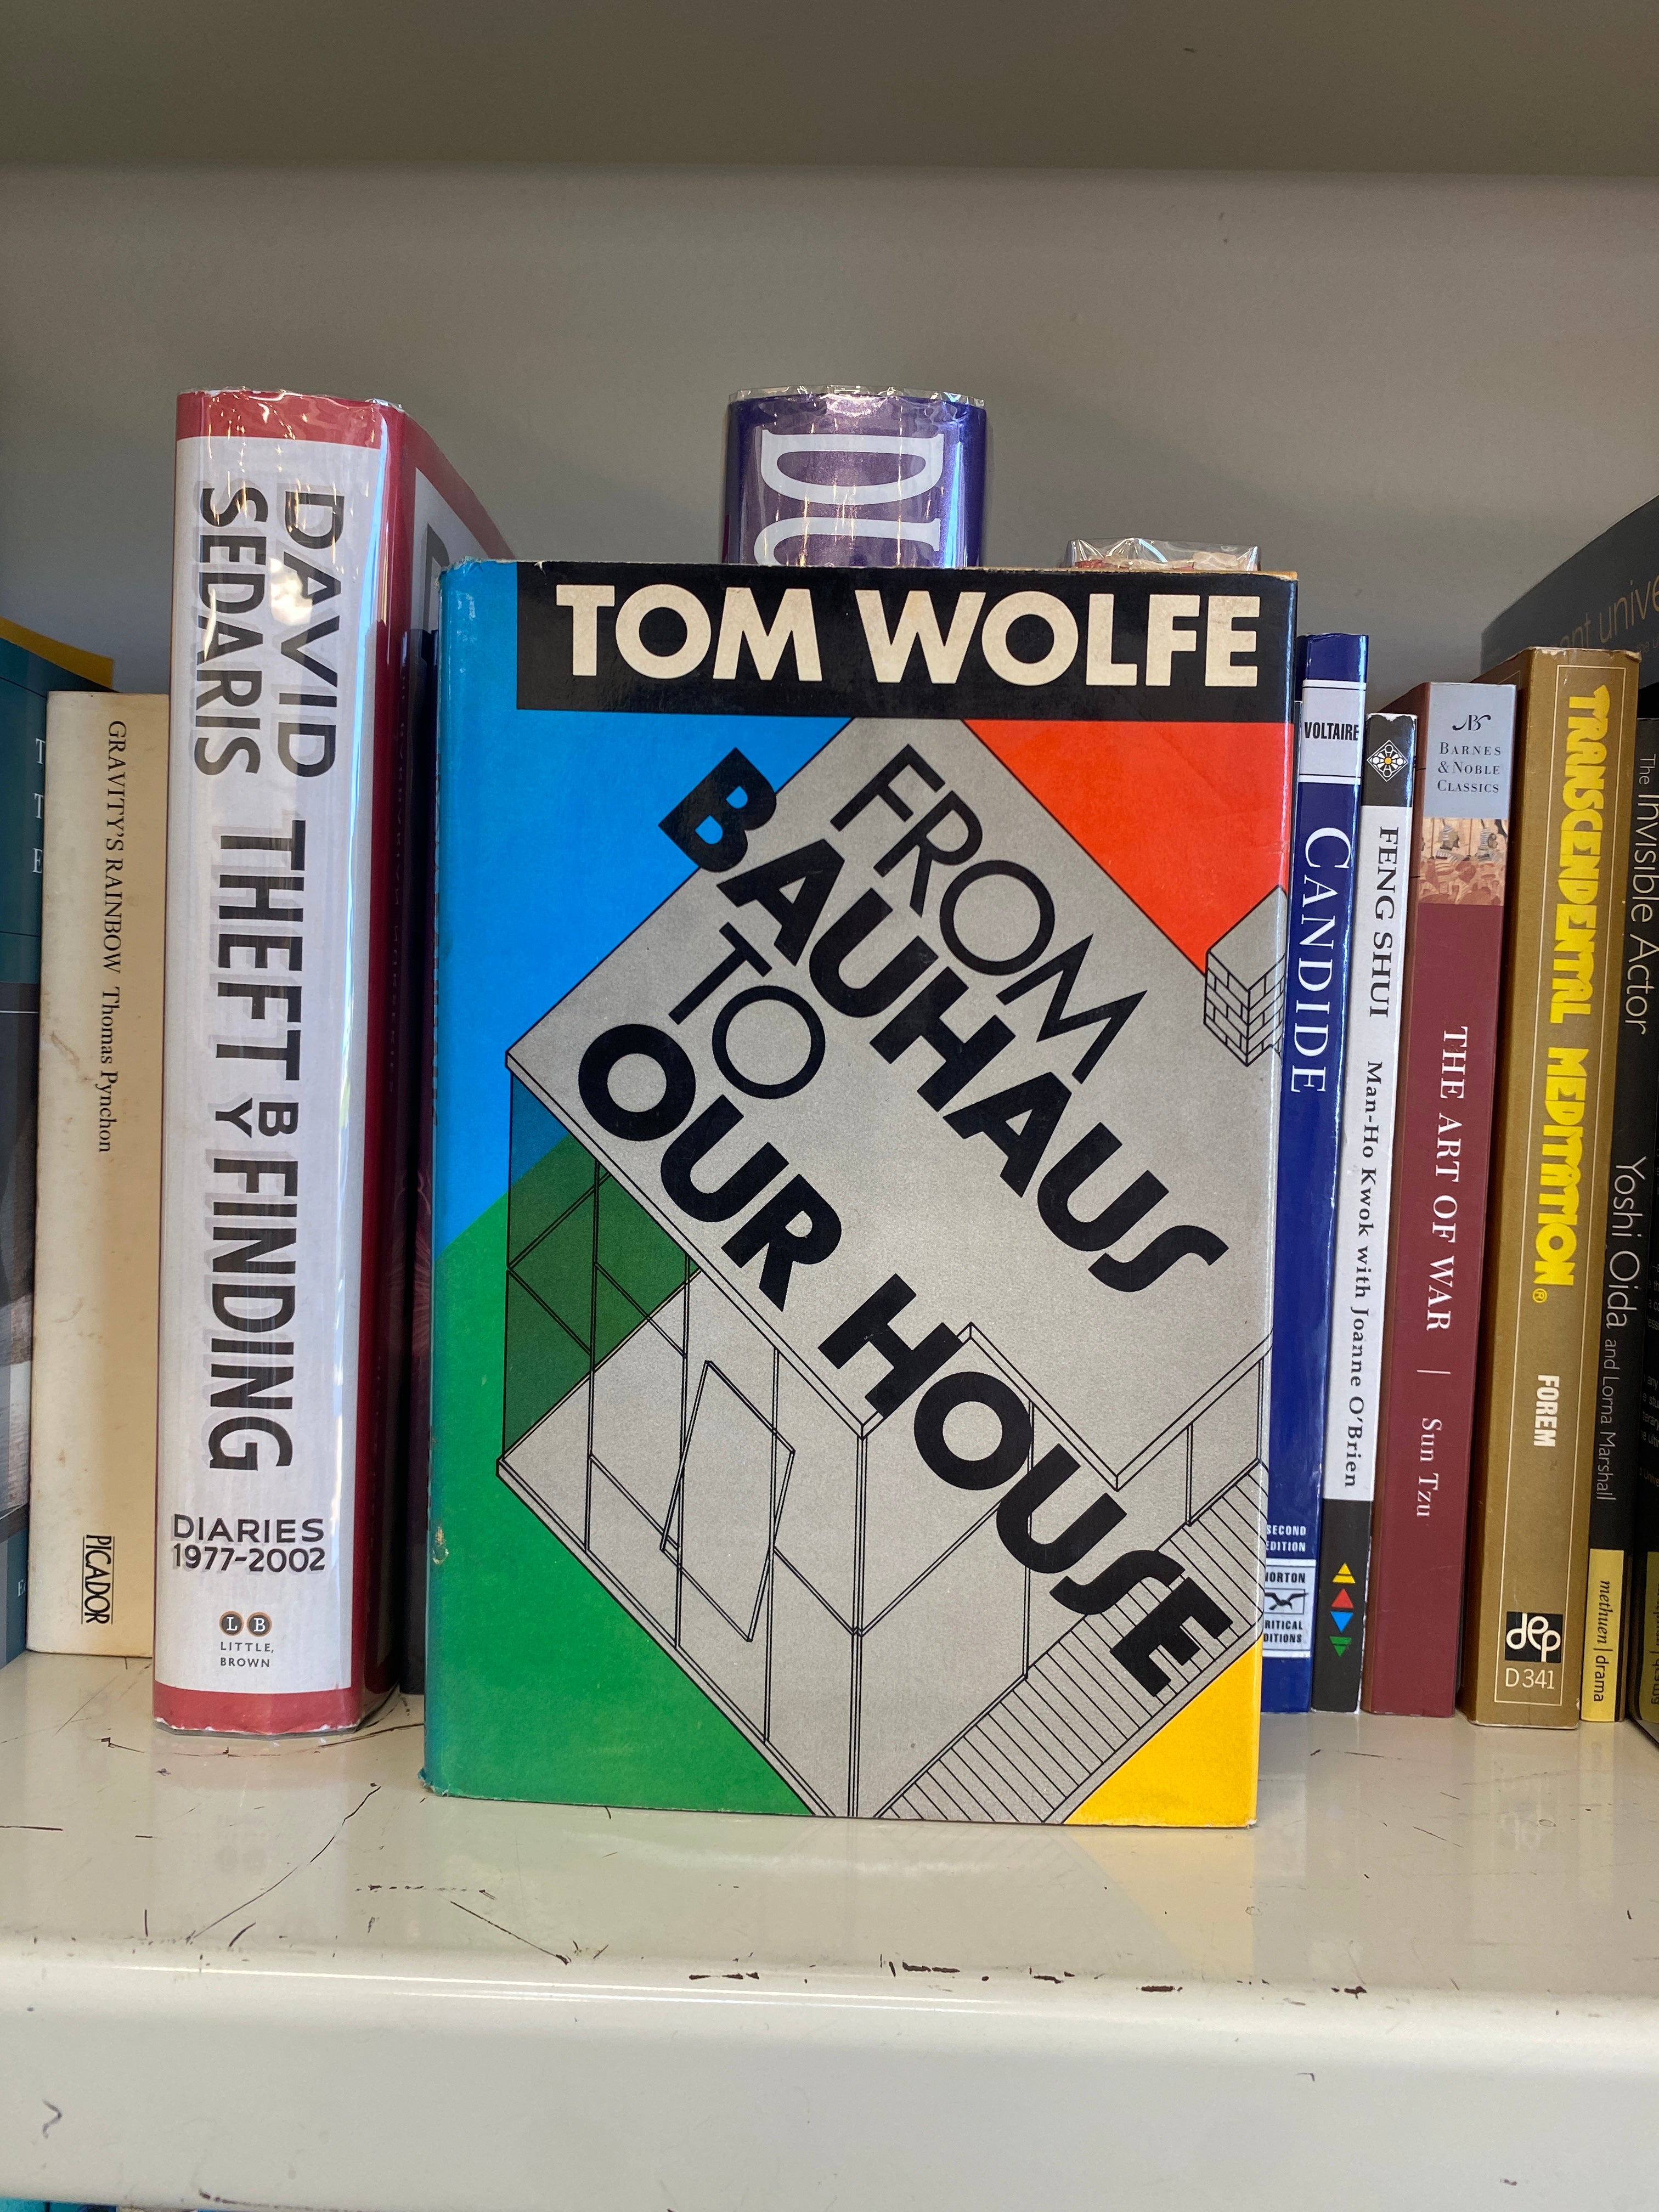 From Bauhaus to Our House by Tom Wolfe (Farrar, Straus and Giroux Hardcover)